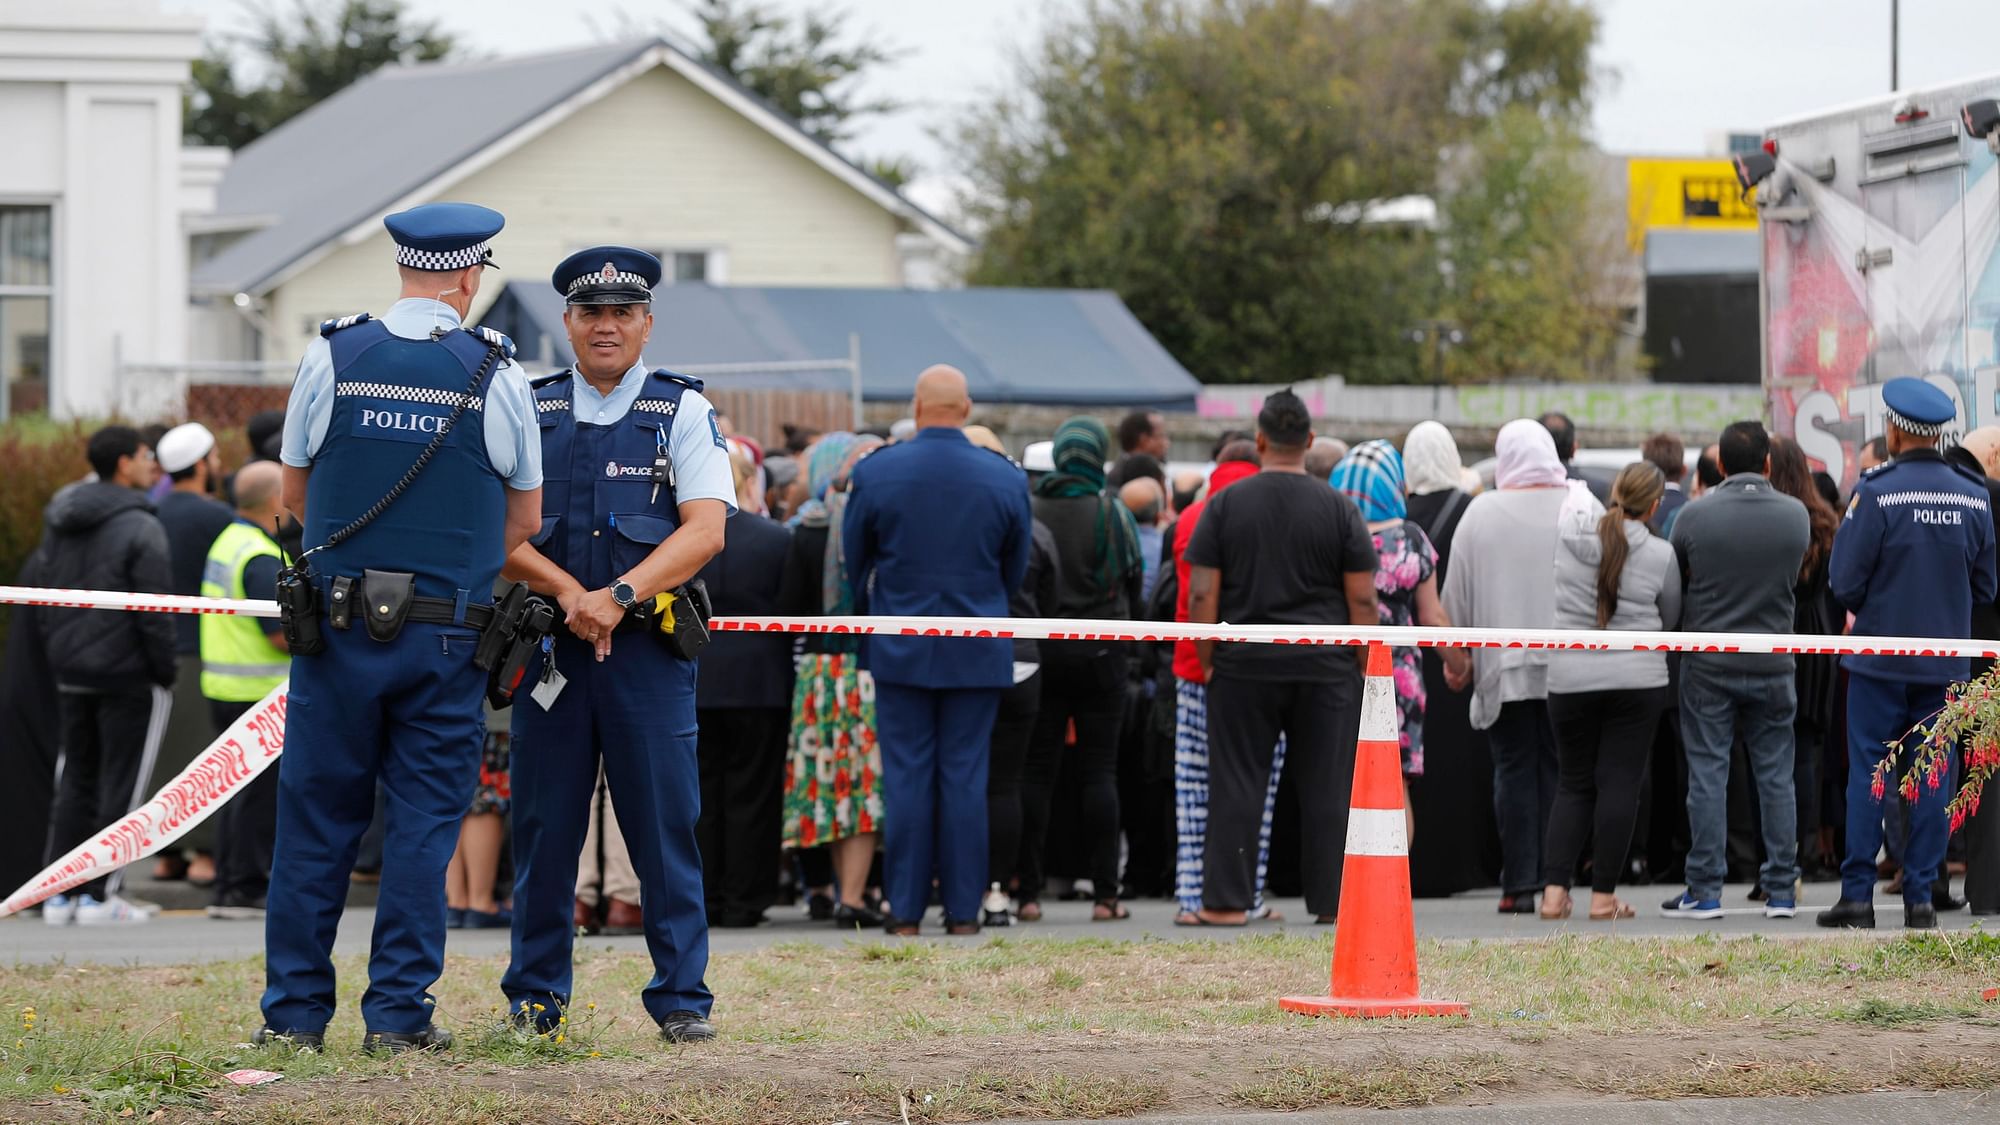  Religious representatives perform a special blessing ceremony on the site of Friday’s shooting outside the Linwood mosque in Christchurch. (Image used for representational purpose only.)